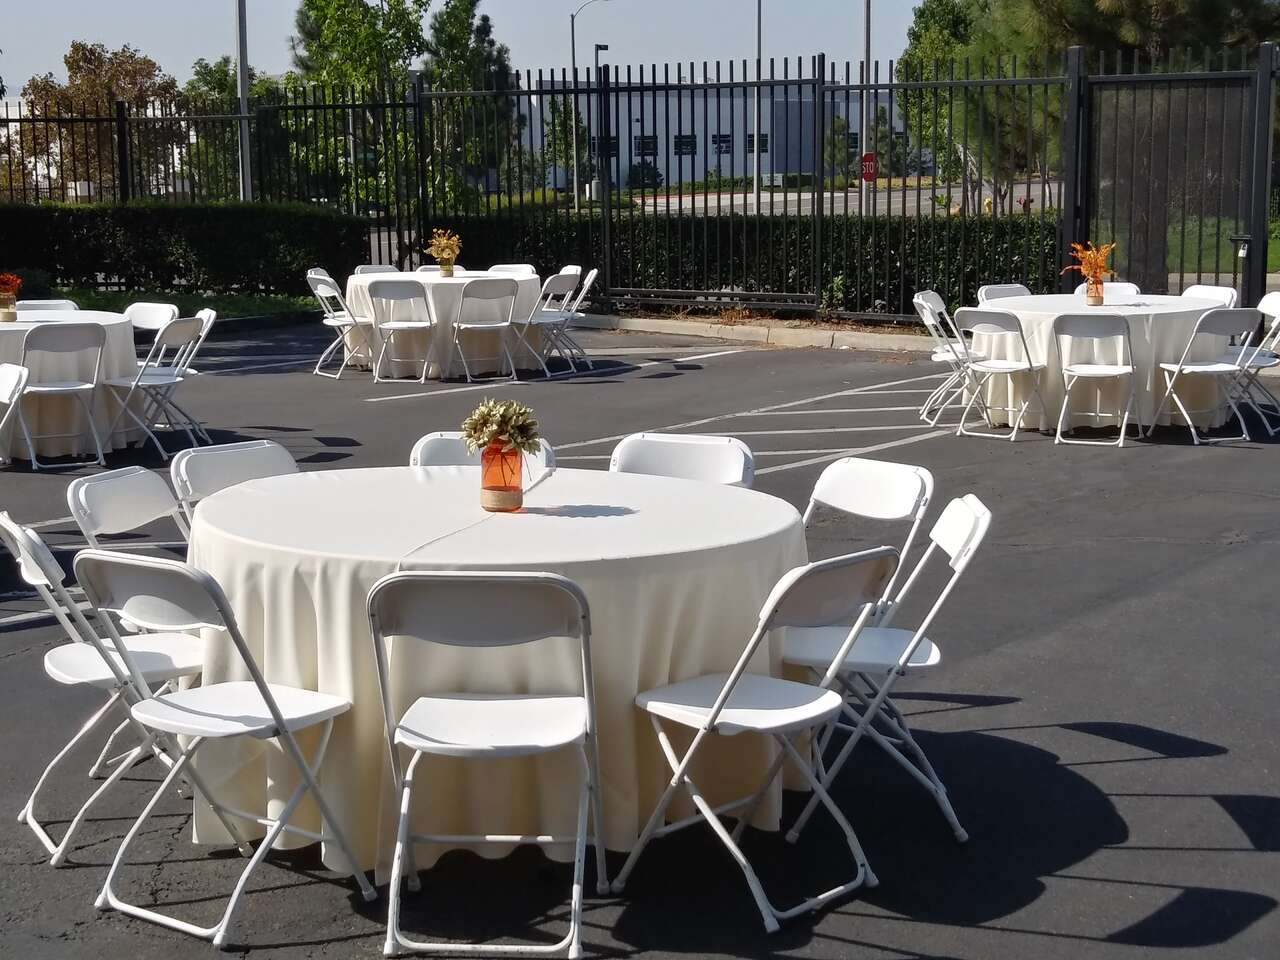 Corporate Company Event, Employee appreciation Day, Party Rentals in Houston, TX